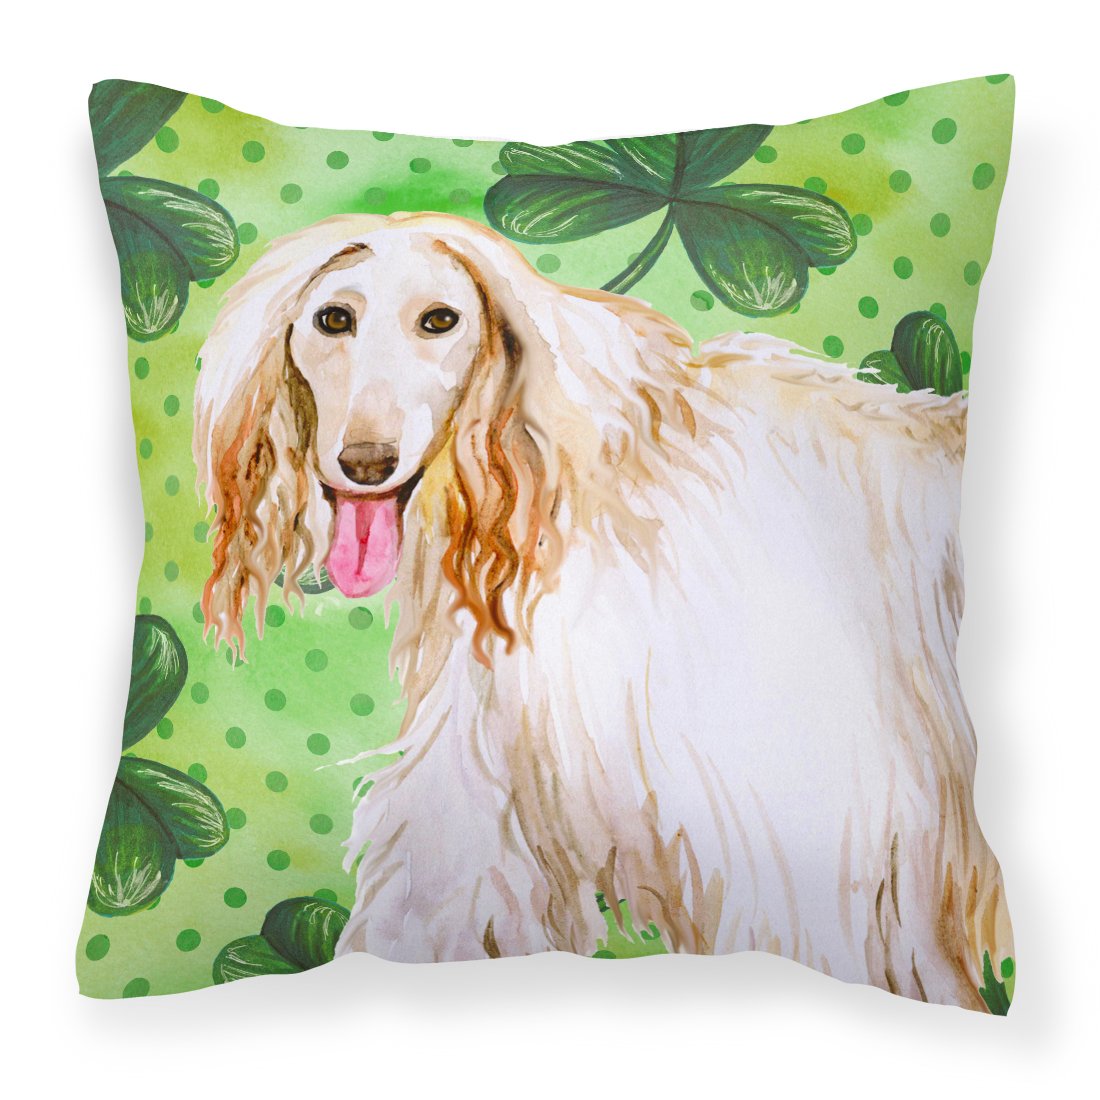 Afghan Hound St Patrick's Fabric Decorative Pillow BB9876PW1818 by Caroline's Treasures